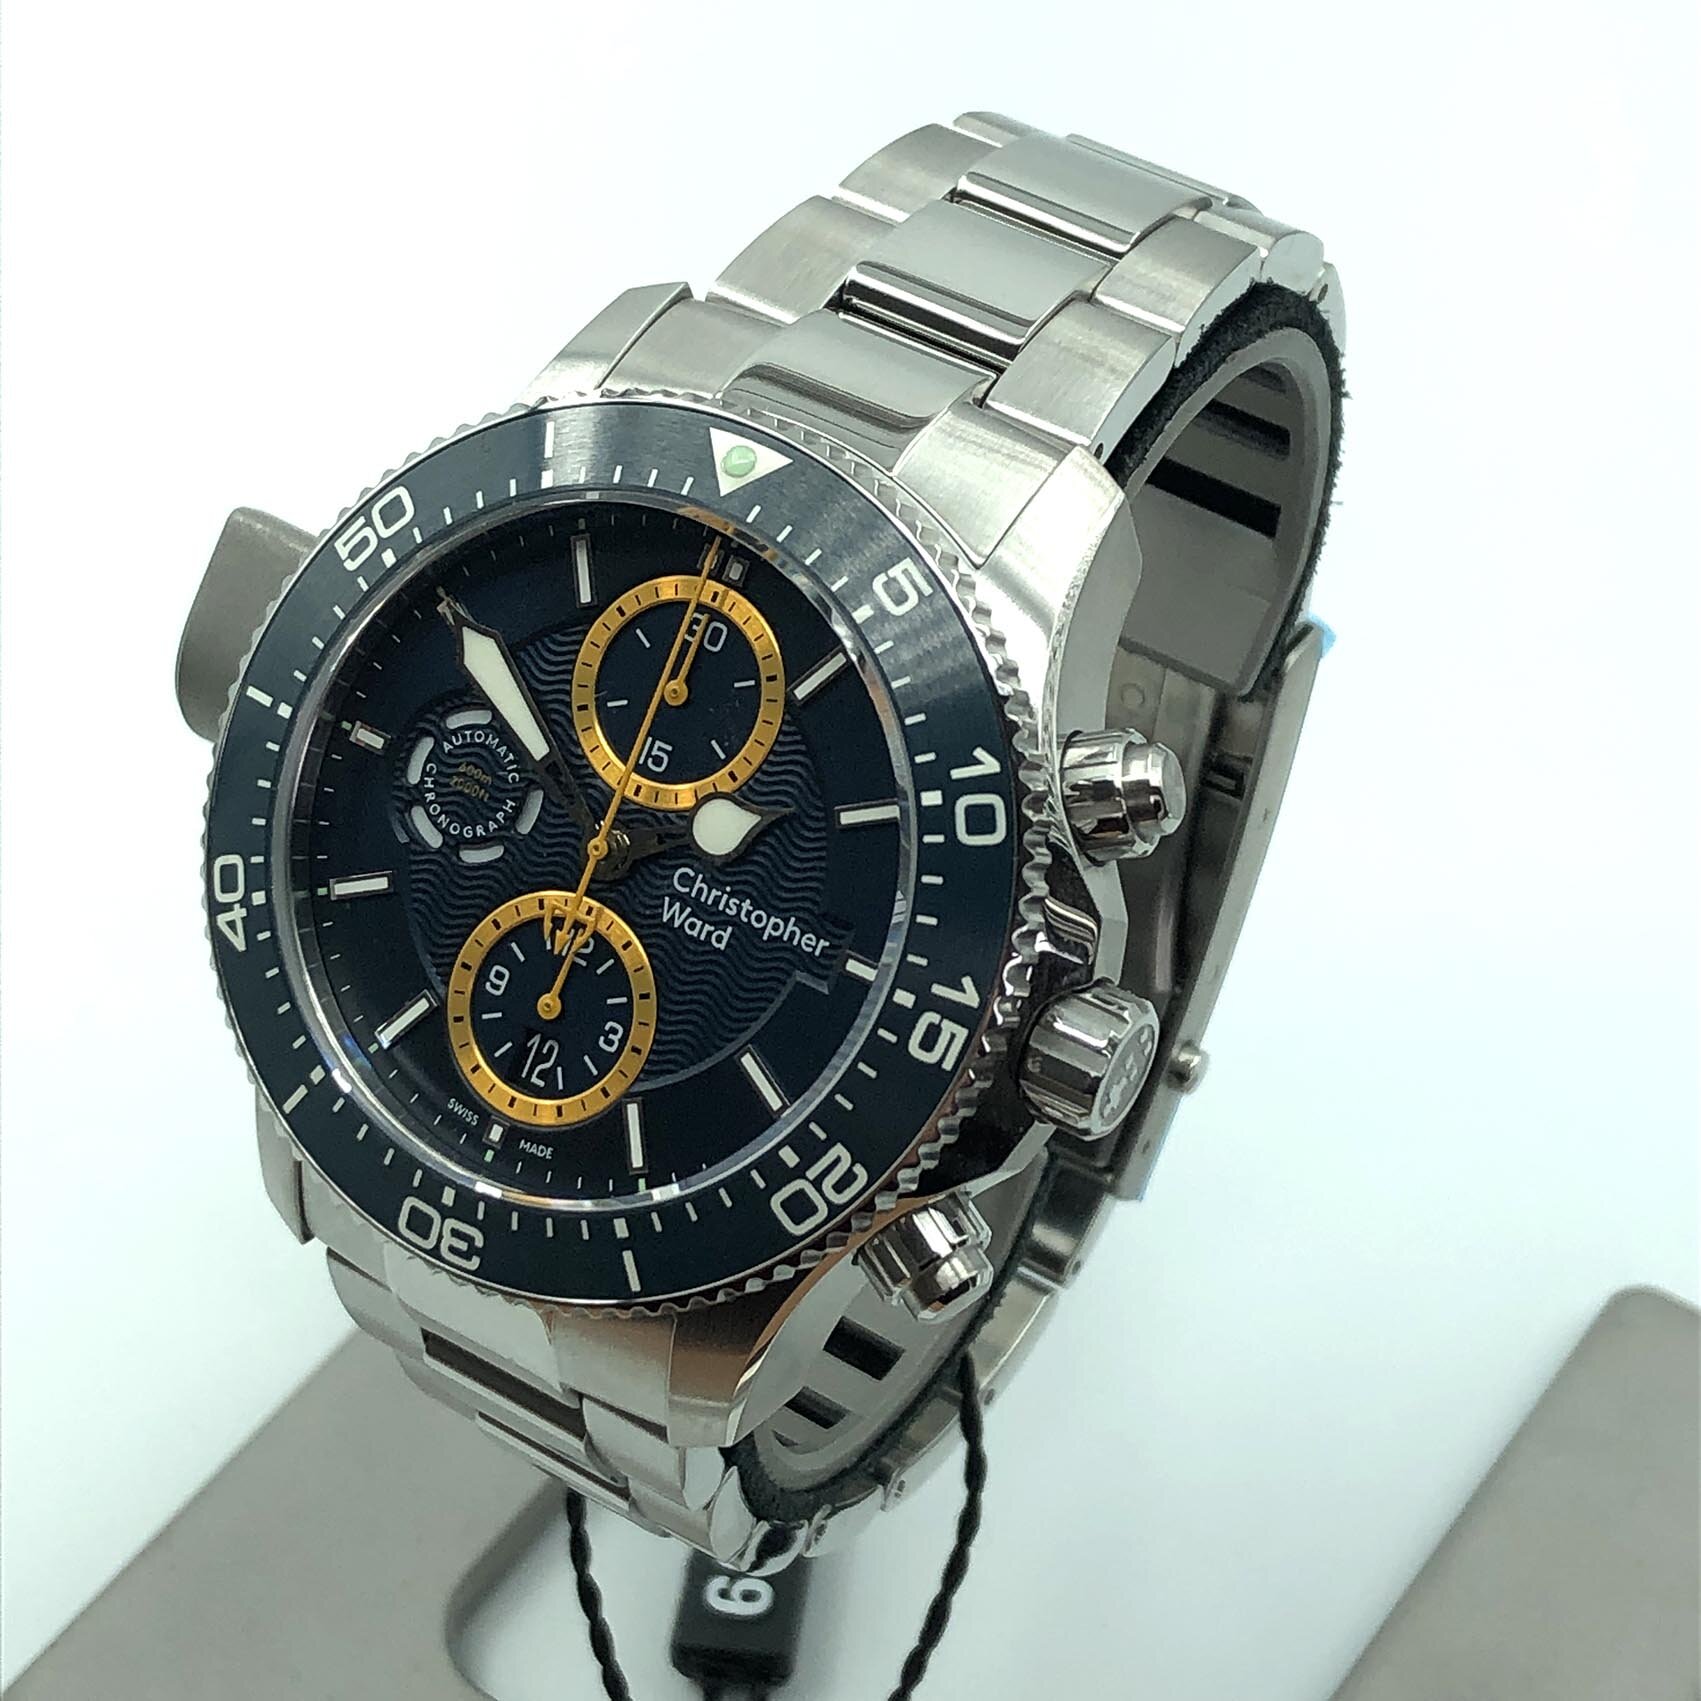 SOLD - C60 Trident Chronograph Pro 600 (2020) — Ward Hoard